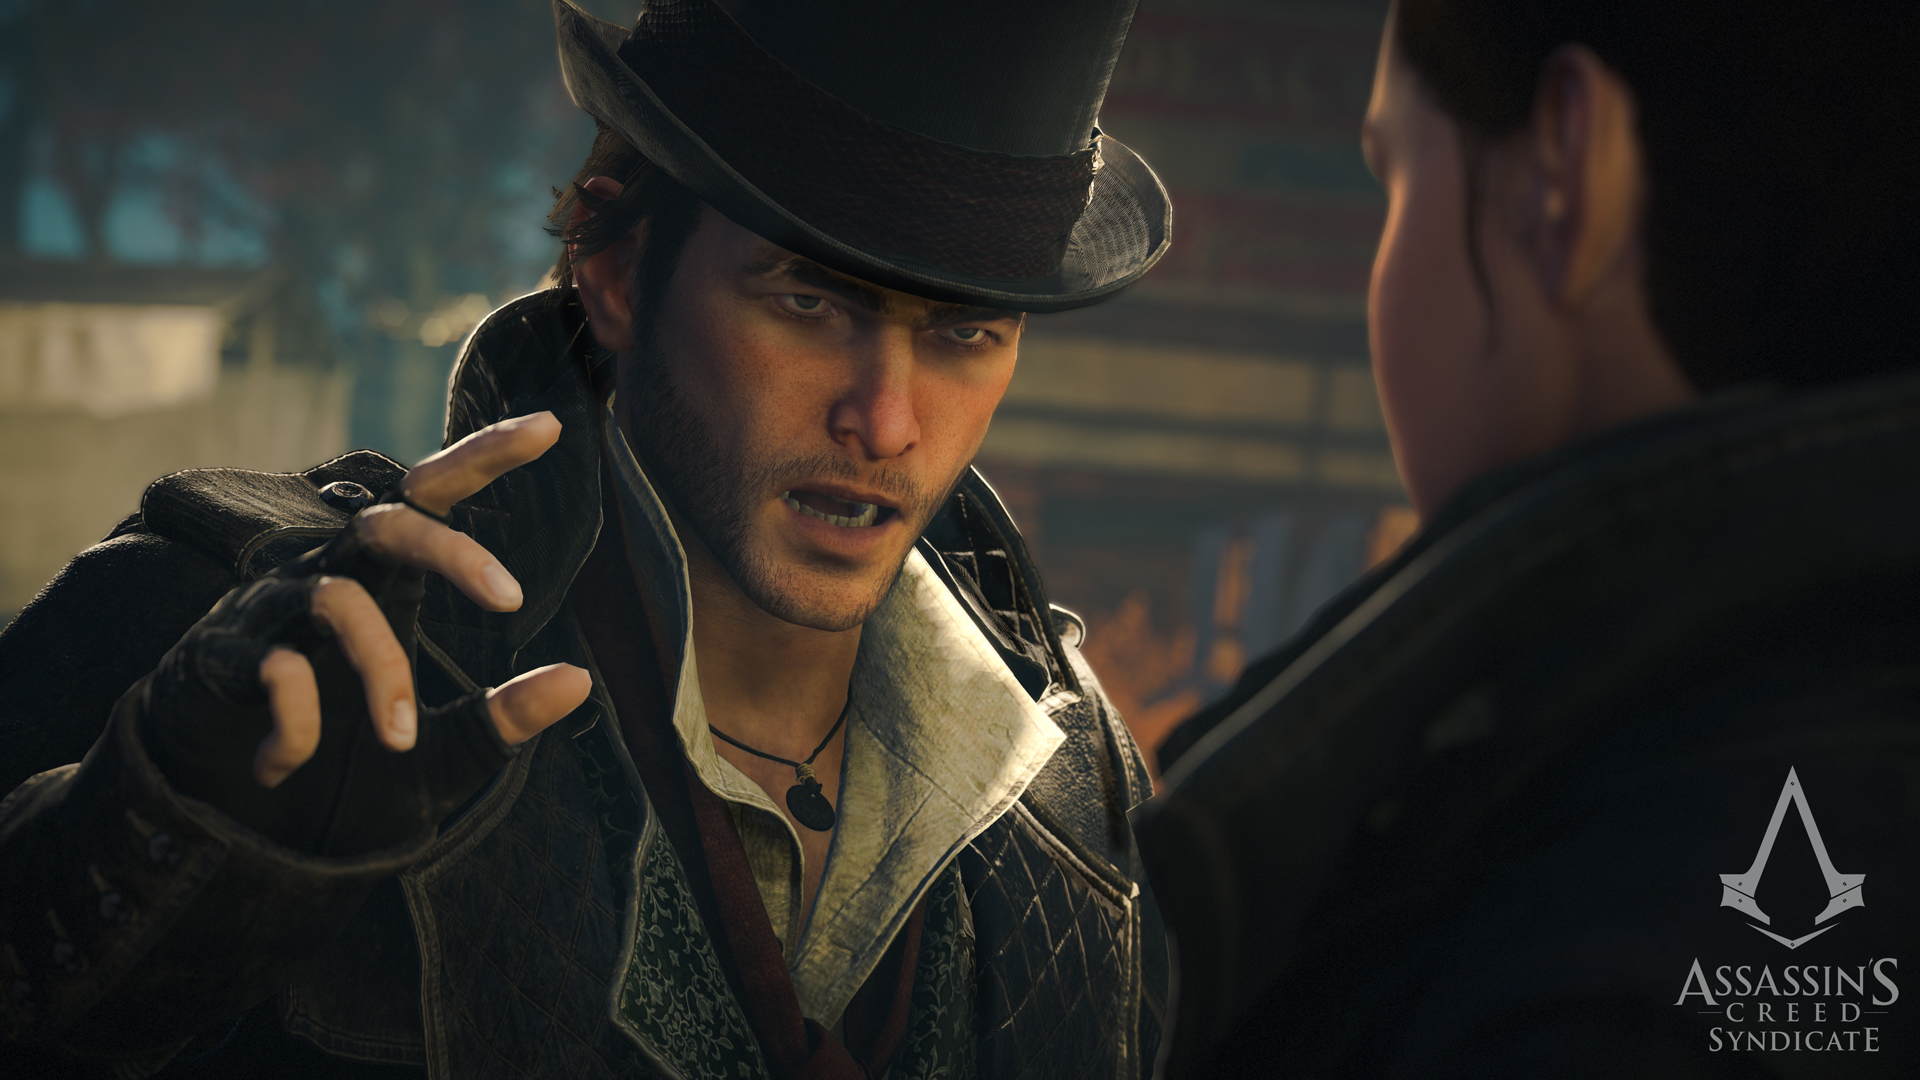 What To Make Of Assassin’s Creed Syndicate, One Month Out